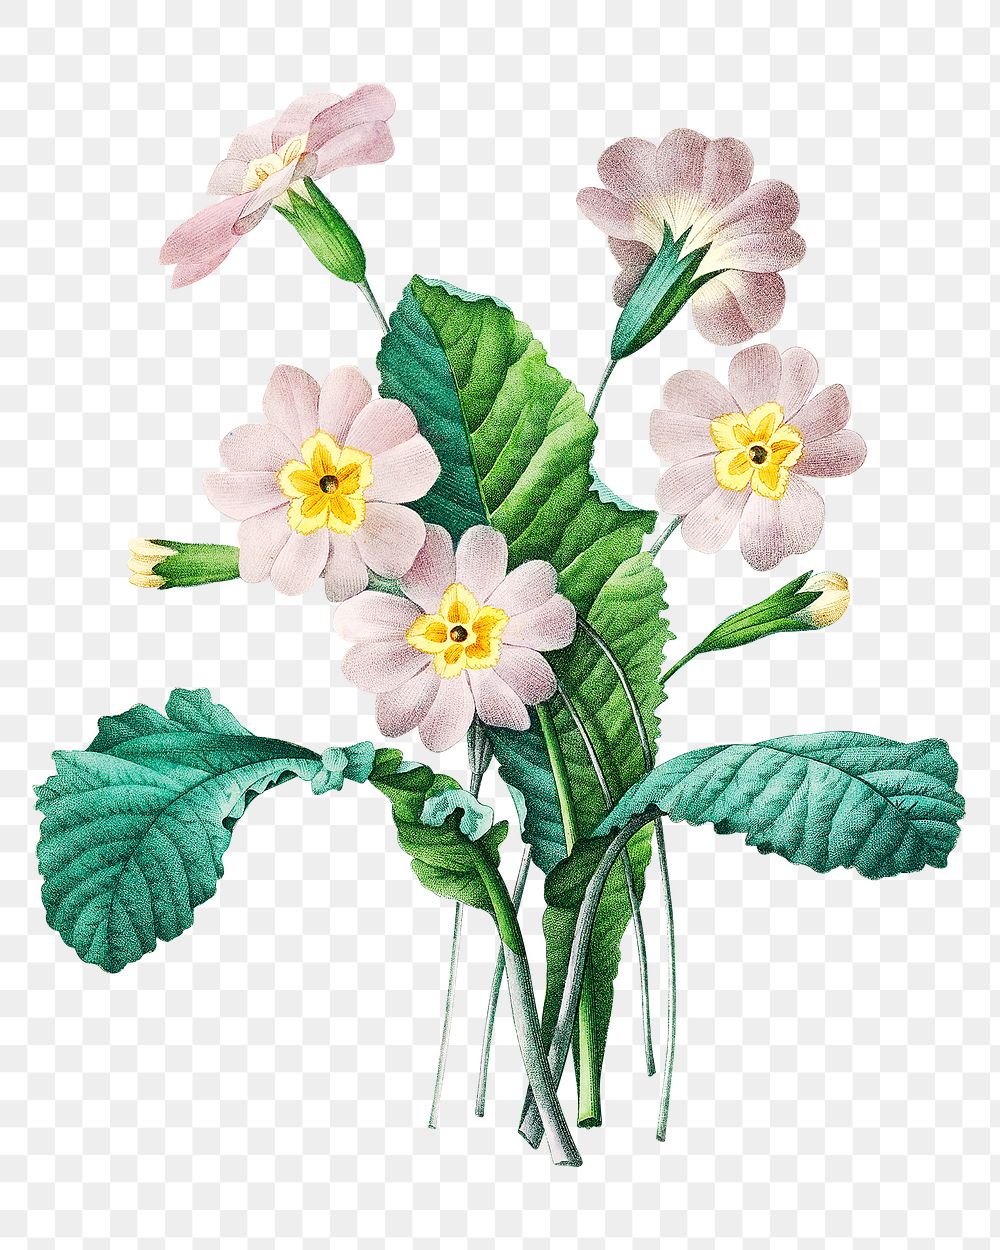 Common primrose flower png botanical illustration, remixed from artworks by Pierre-Joseph Redout&eacute;